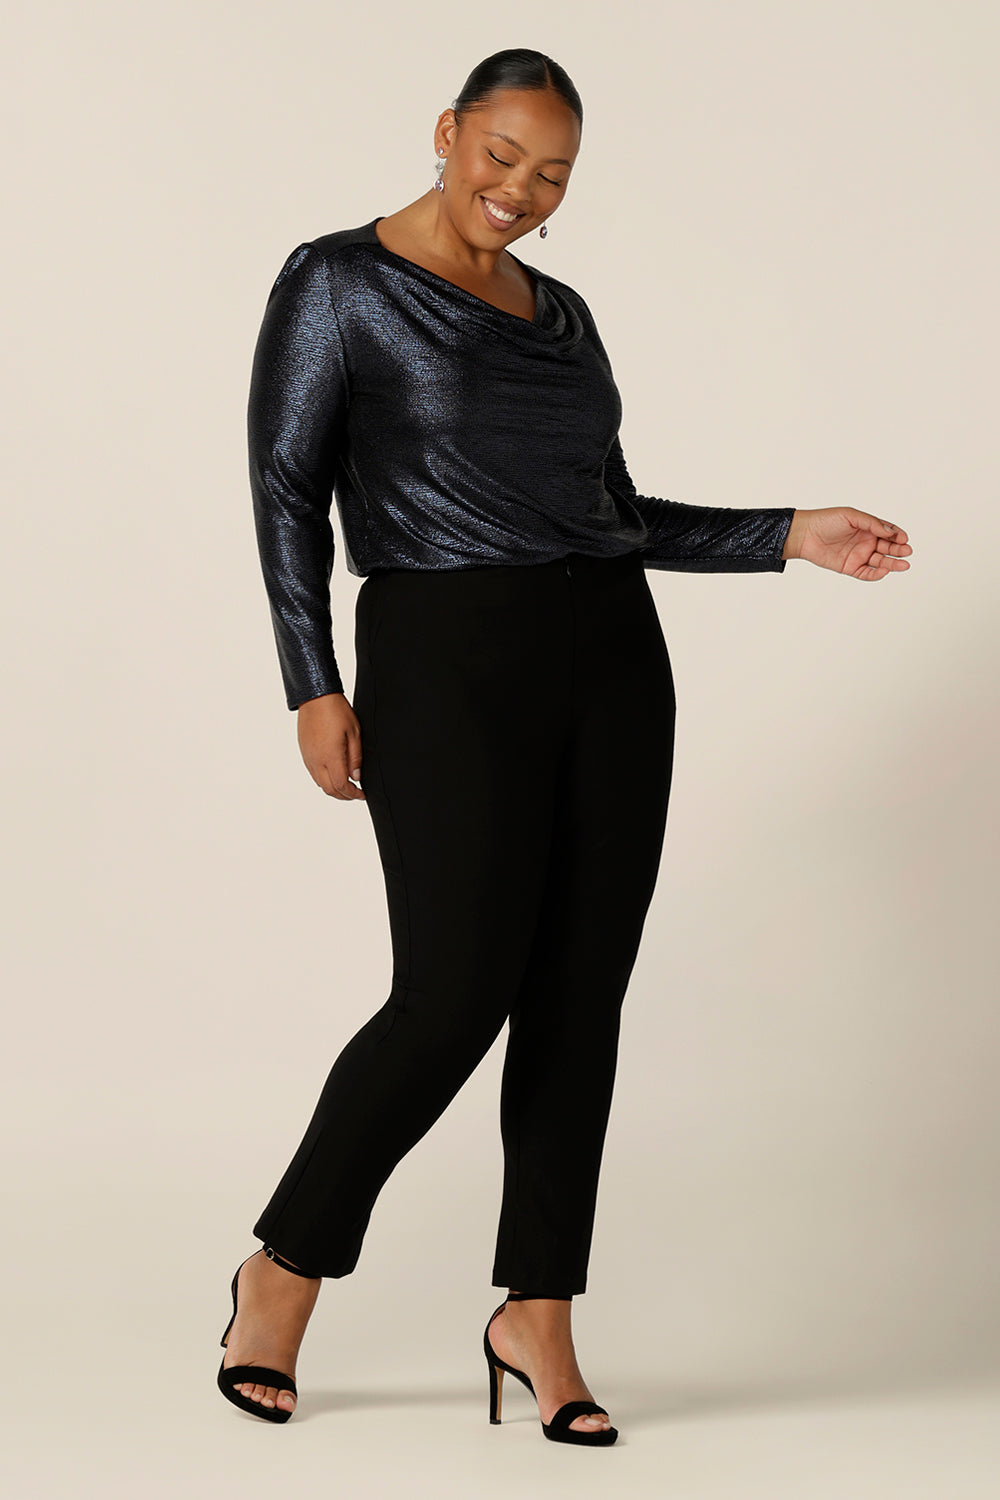 A long sleeve occasionwear top with cowl neck in shimmering midnight blue jersey fabric, size 18 is worn with slim leg, black evening trousers, size 18. Both plus size occasionwear garments are made in Australia in sizes 8 to 24 by Australian and New Zealand women's fashion label, L&F.